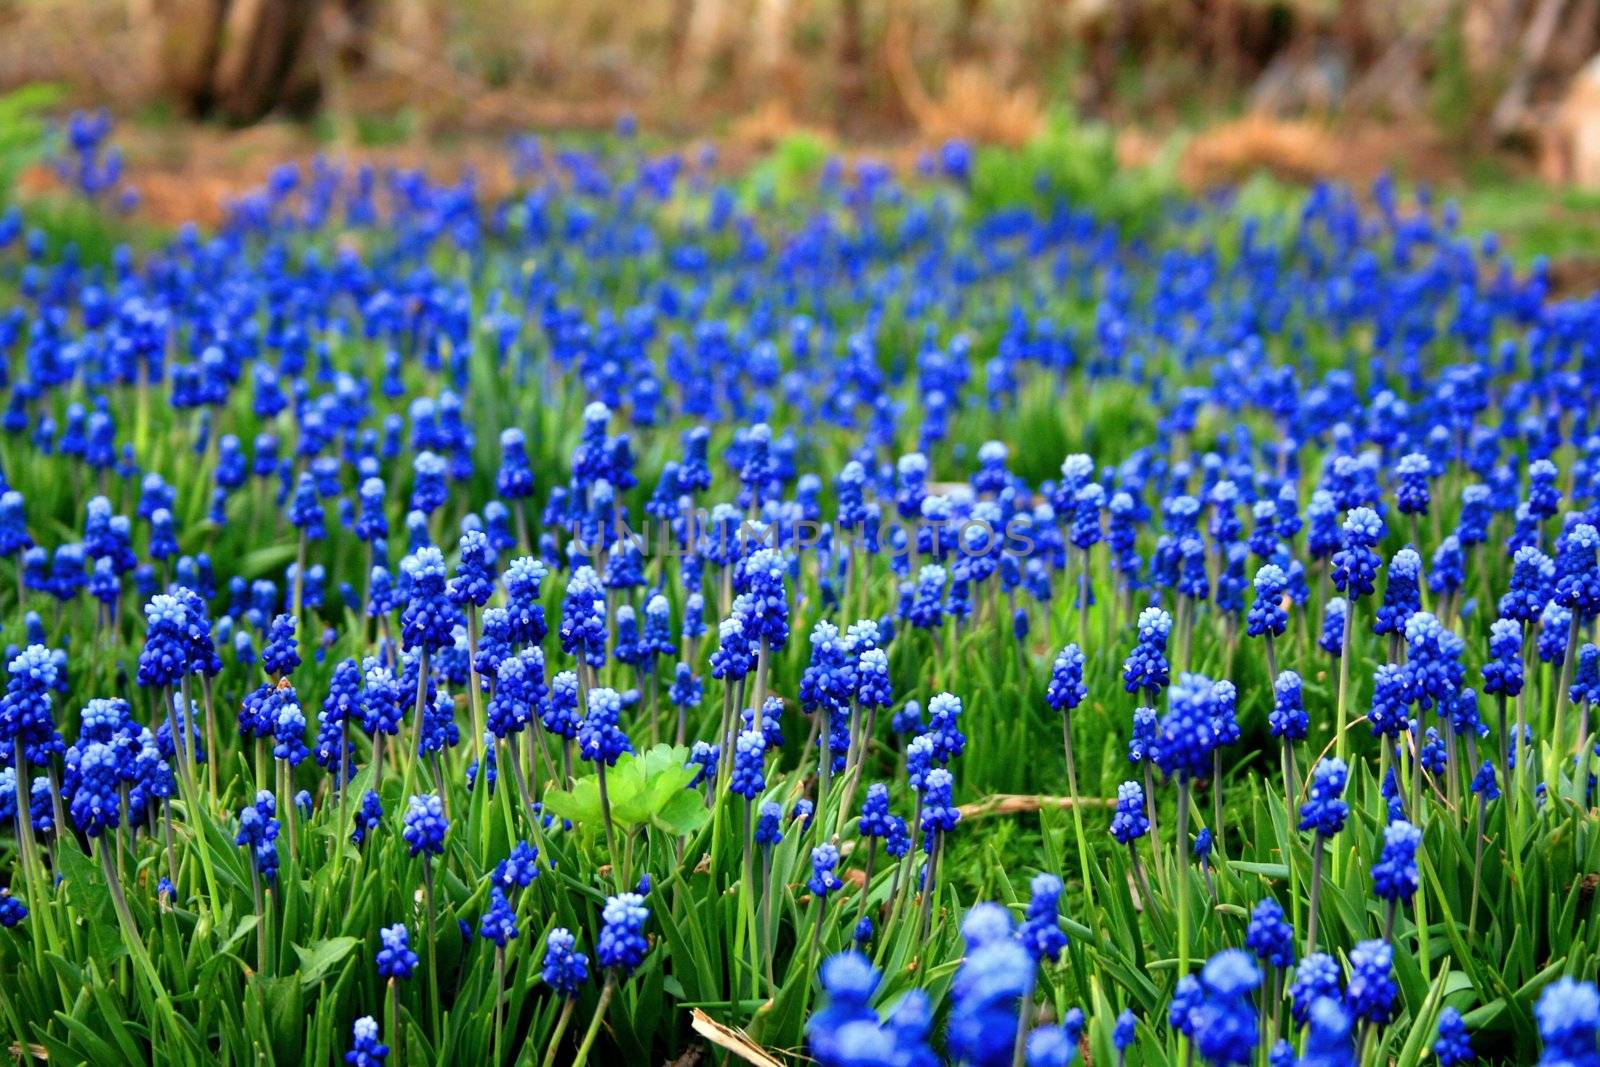 This is a field of beautiful blue flowers